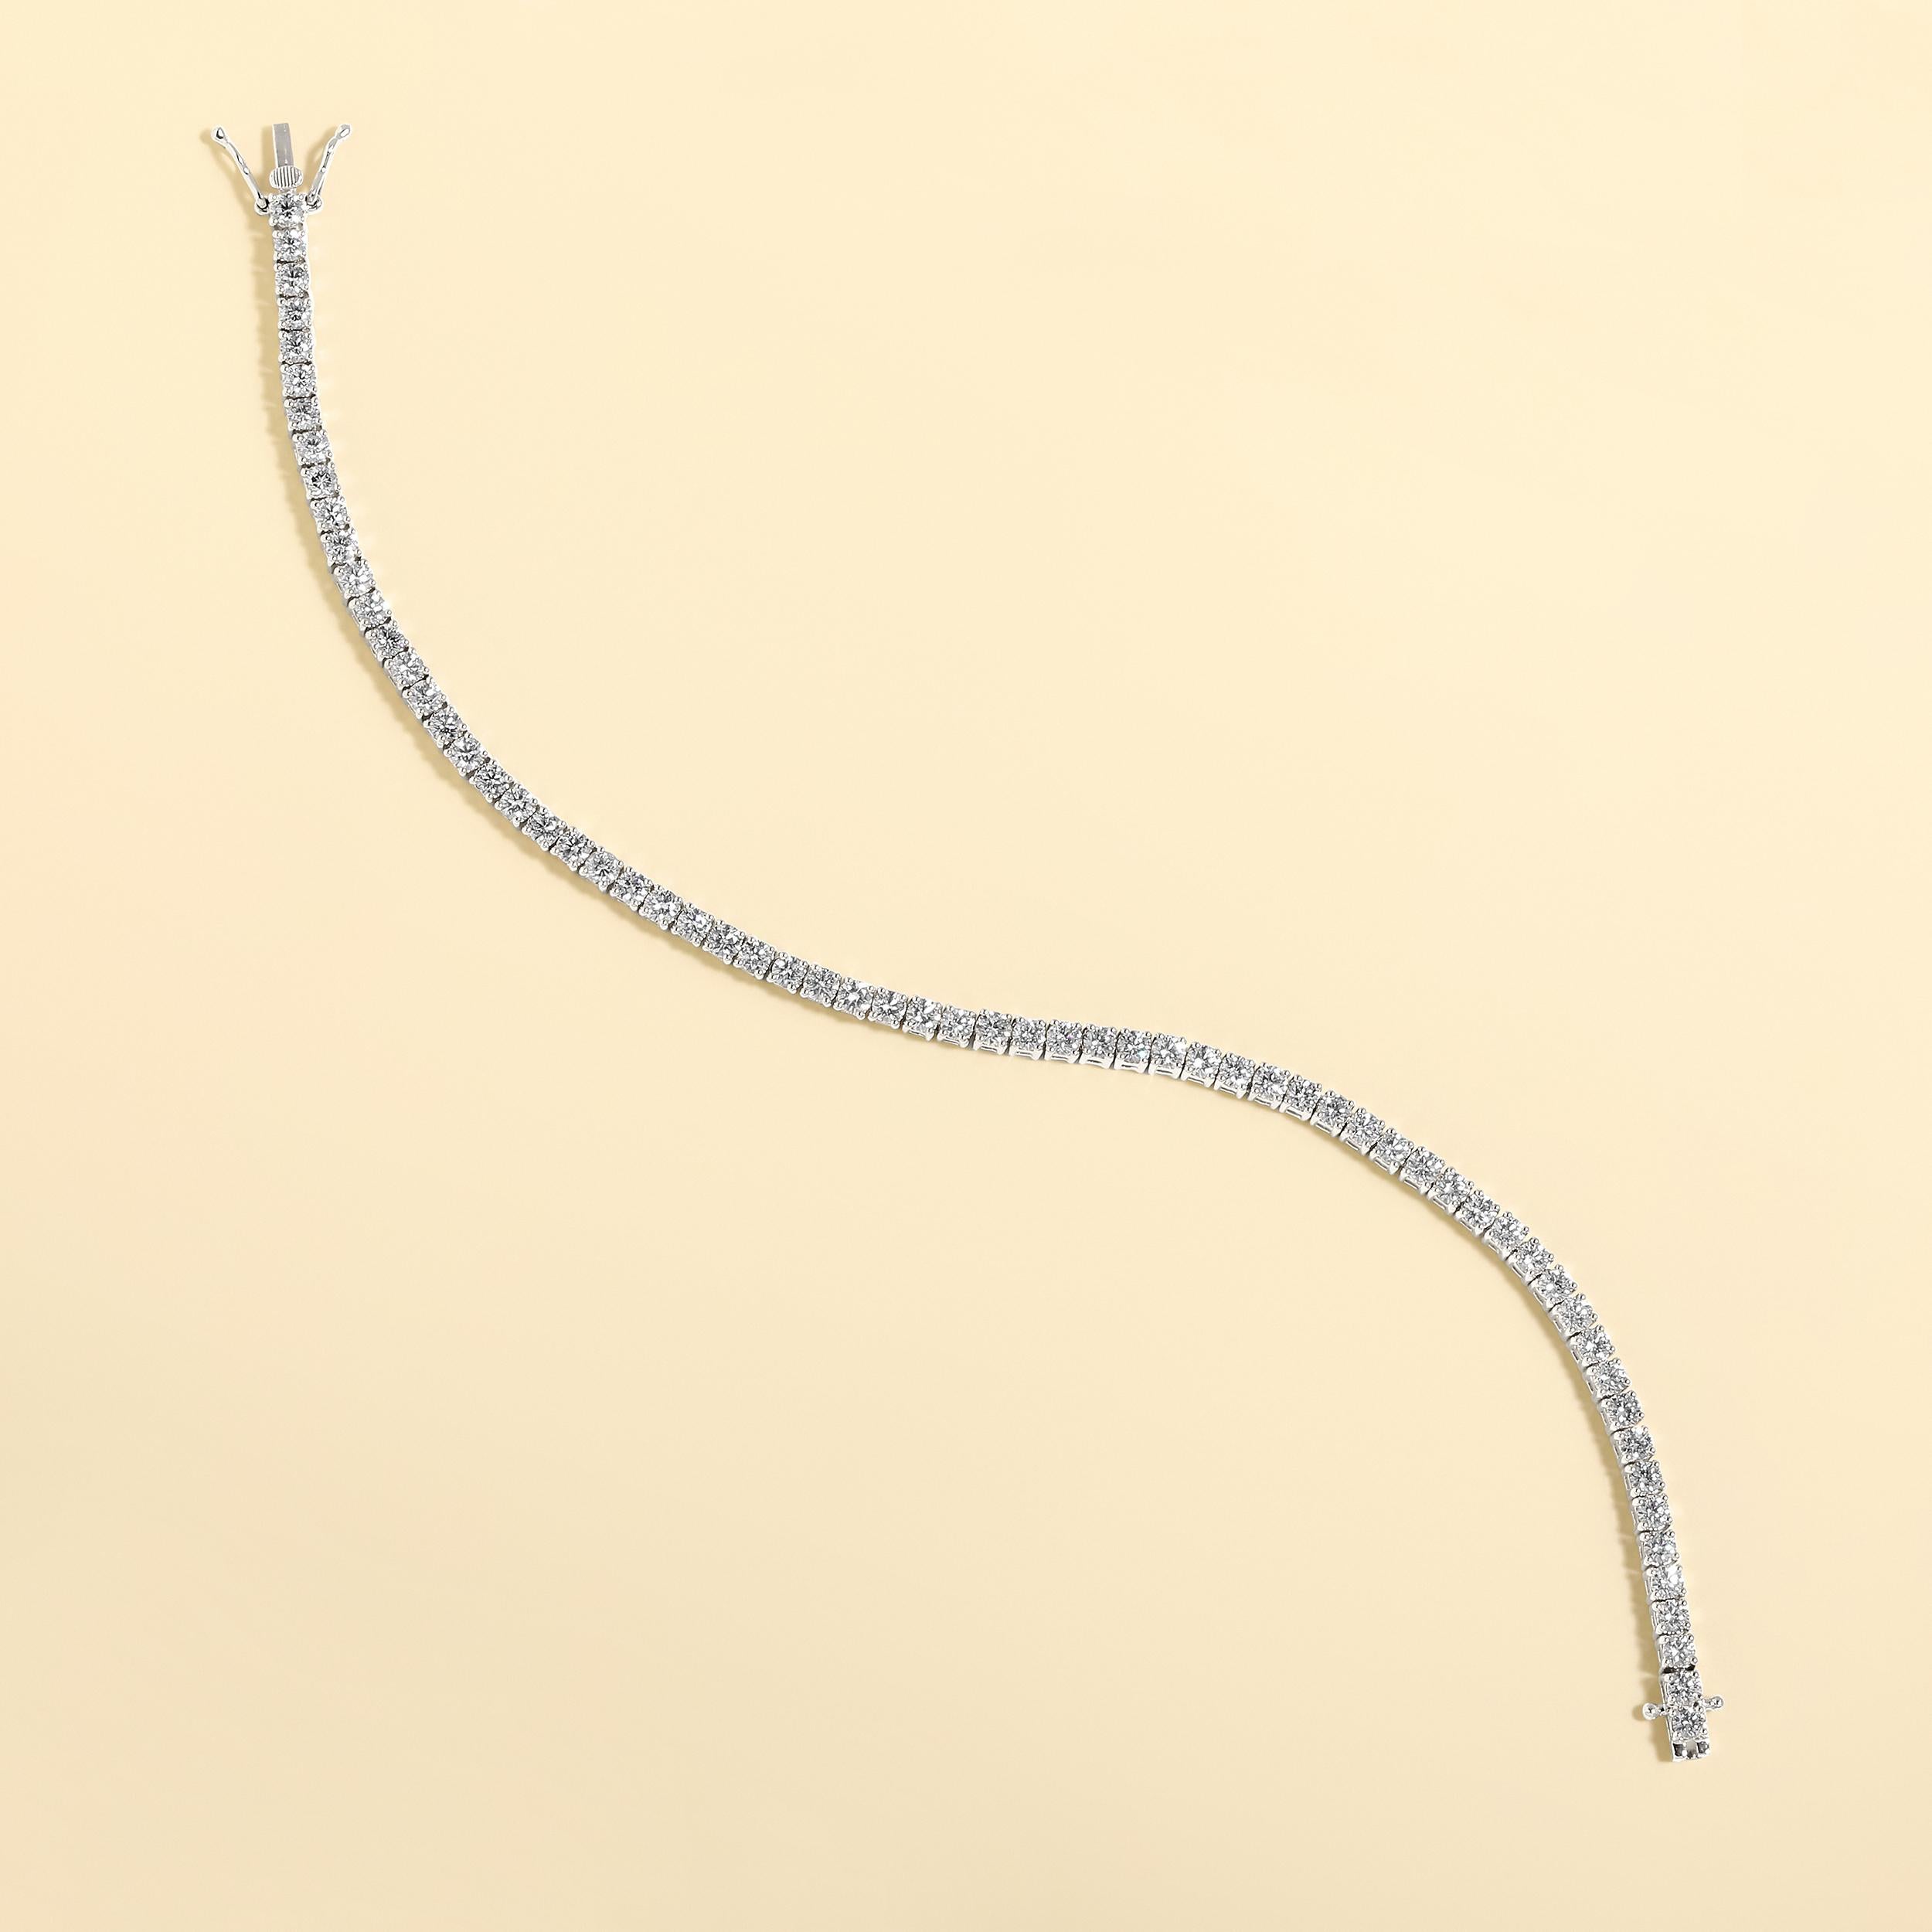 Crafted in 10.21 grams of 14K White Gold, the bracelet contains 66 stones of Round Natural Diamonds with a total of 4 carat in G-H color and VS-SI clarity. The bracelet length is 7 inches.

This jewelry piece will be expertly crafted by our skilled